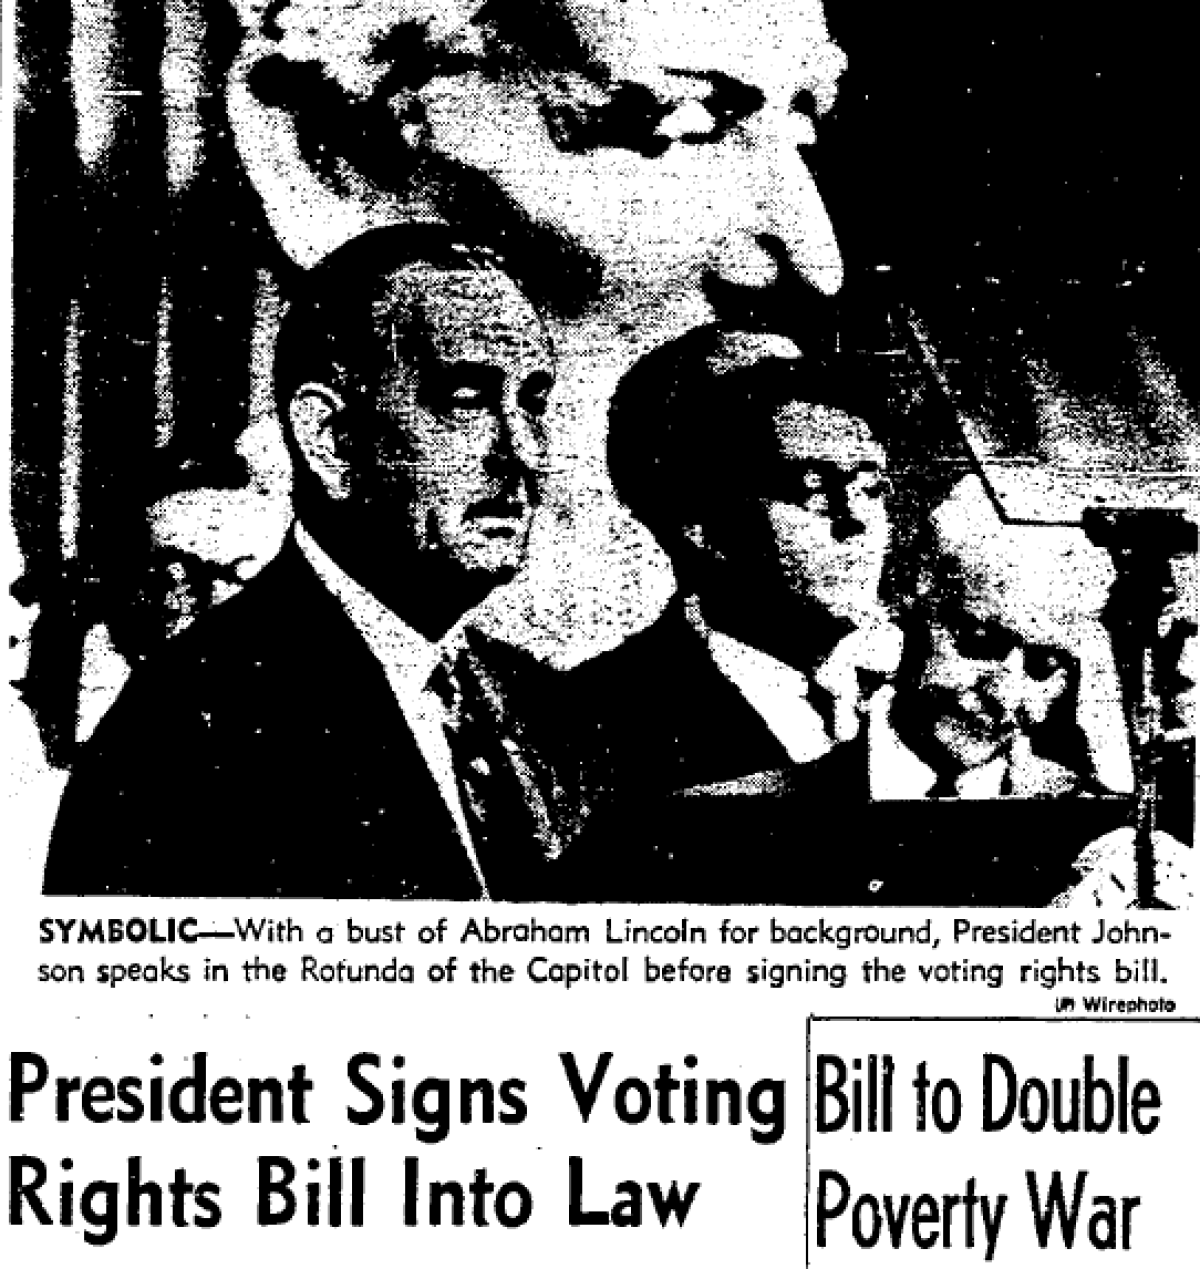 An article on the front page of the Los Angeles Times on Aug. 7, 1965 about Pres. Lyndon B. Johnson signing the Voting Rights Act.